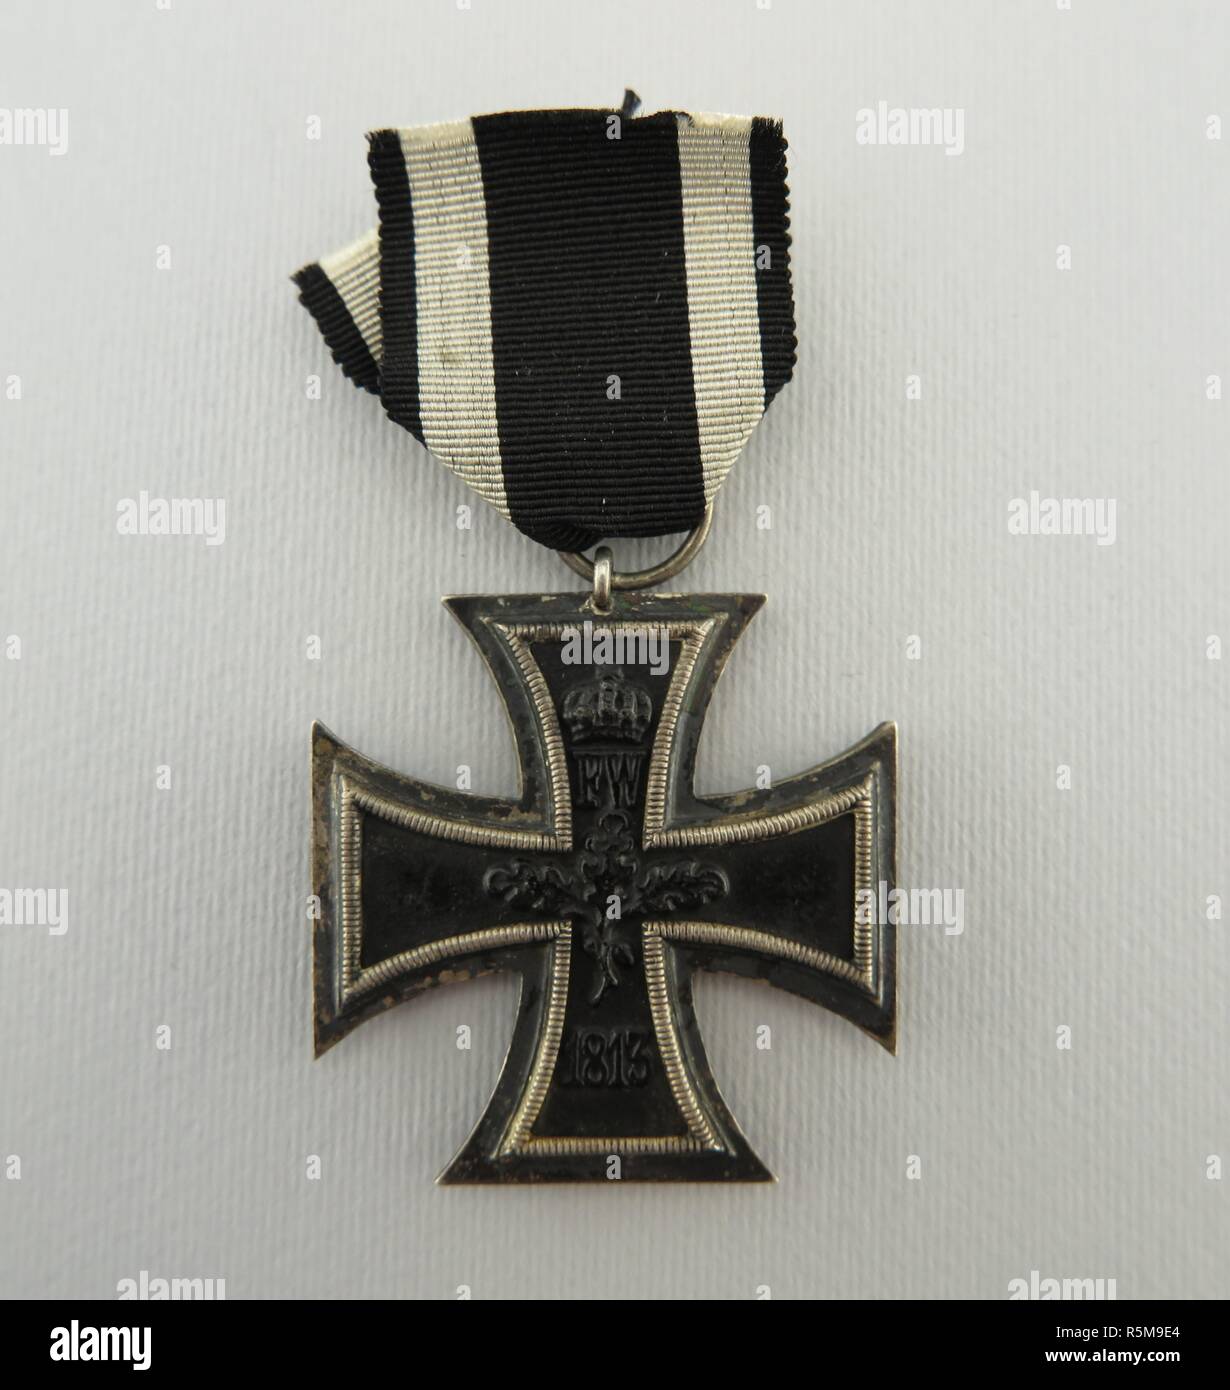 German Iron Cross 2nd Class. Museum: PRIVATE COLLECTION. Author: Orders, decorations and medals. Stock Photo